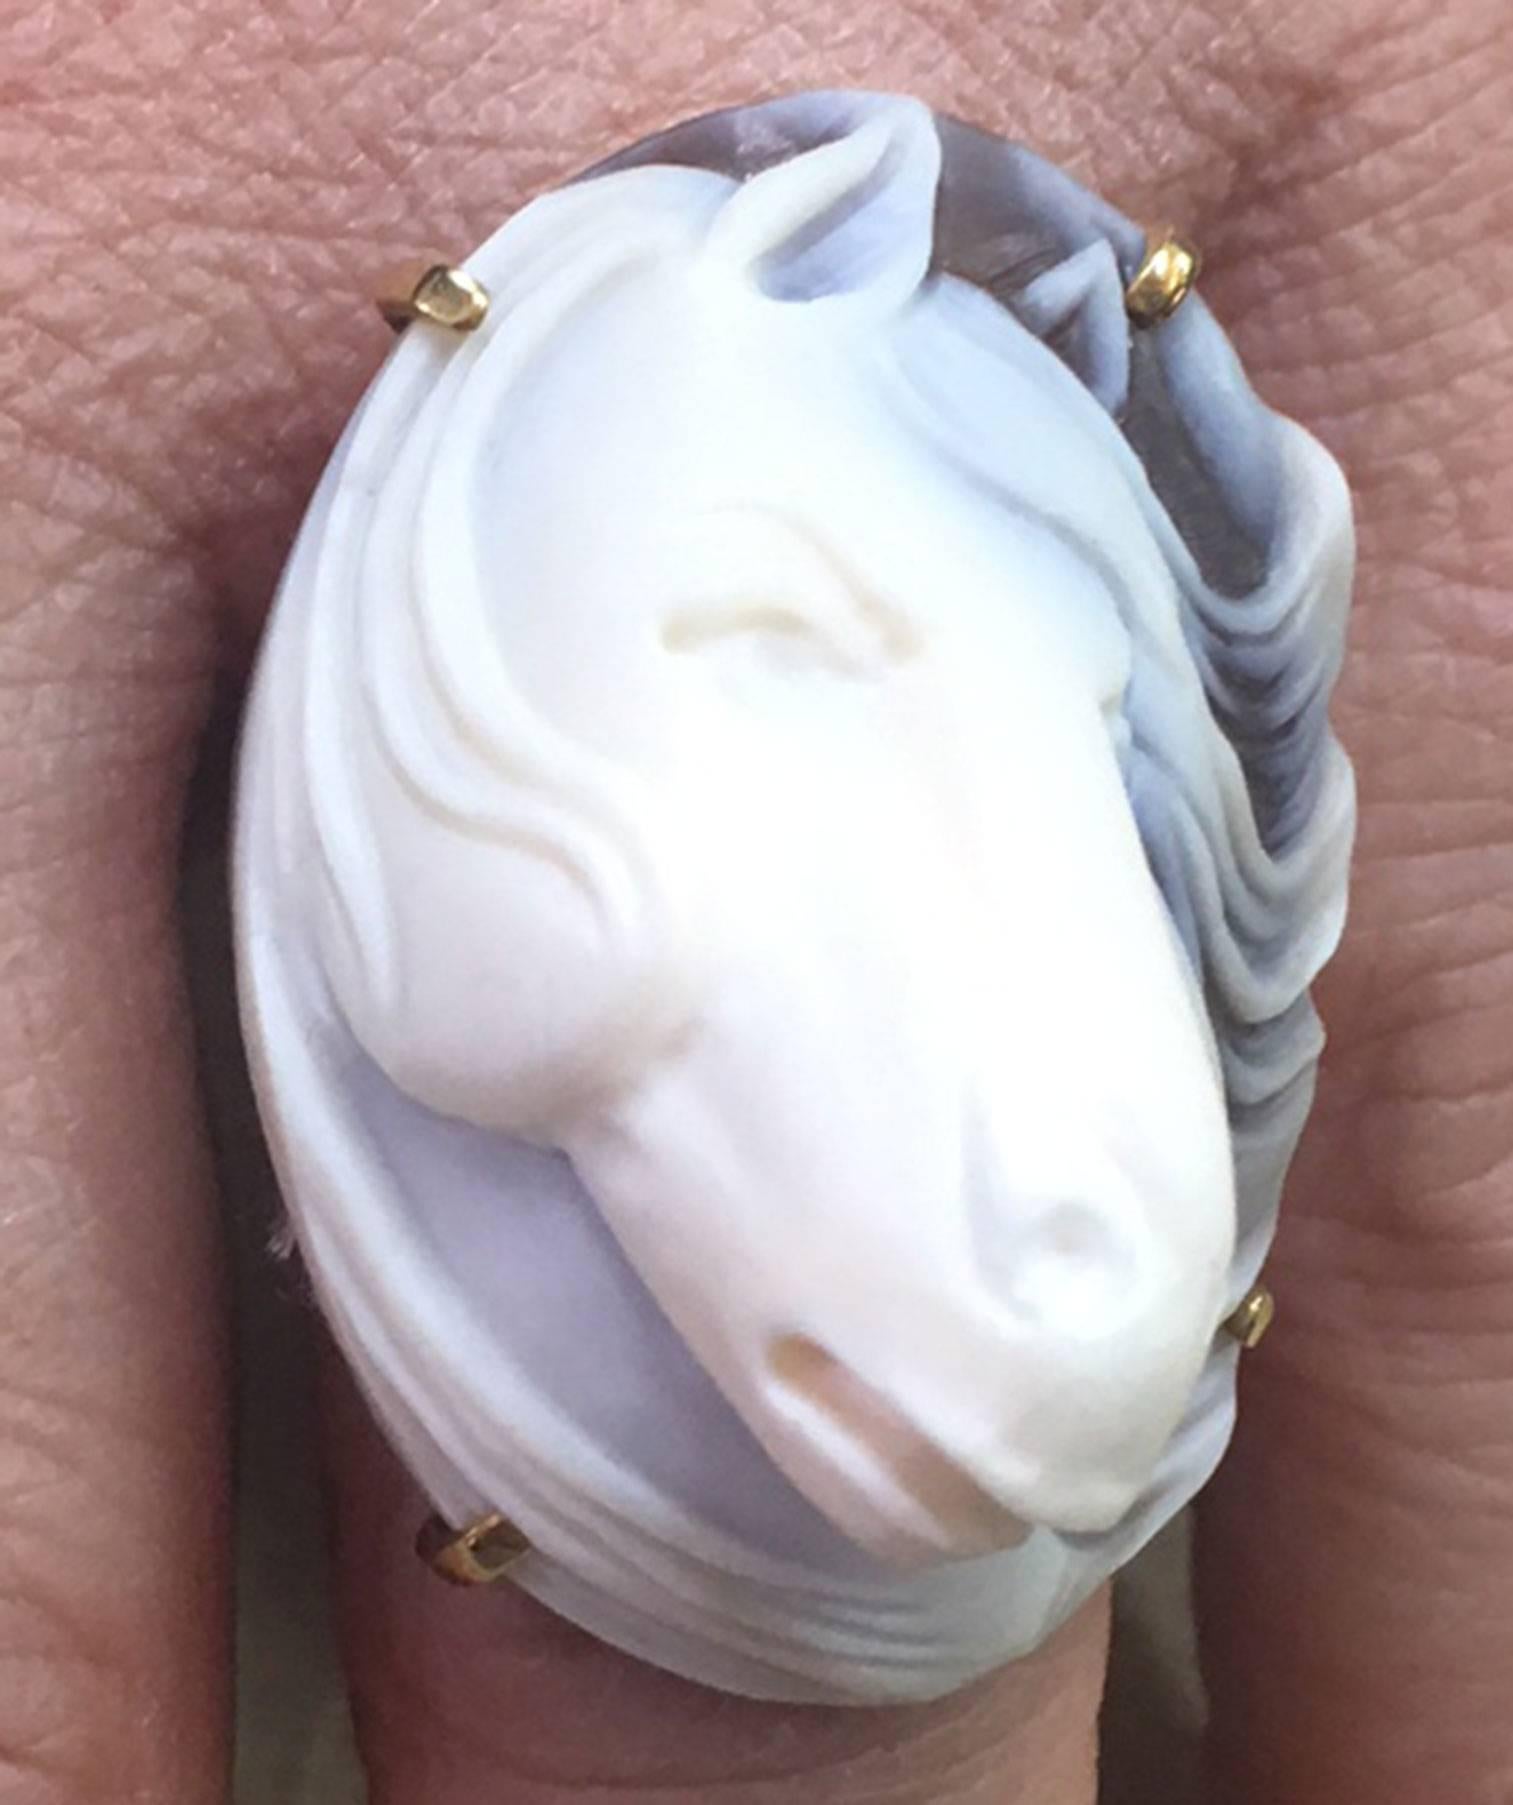 Beautiful highly detailed hand carved Heirloom Quality Cameo of a Horse Head adorns this ring. Hand crafted band on both sides so well designed and allows comfortable wear. Size 7.5; Rose Gold Sterling Silver mounting; shank marked: ITALY 925. Top